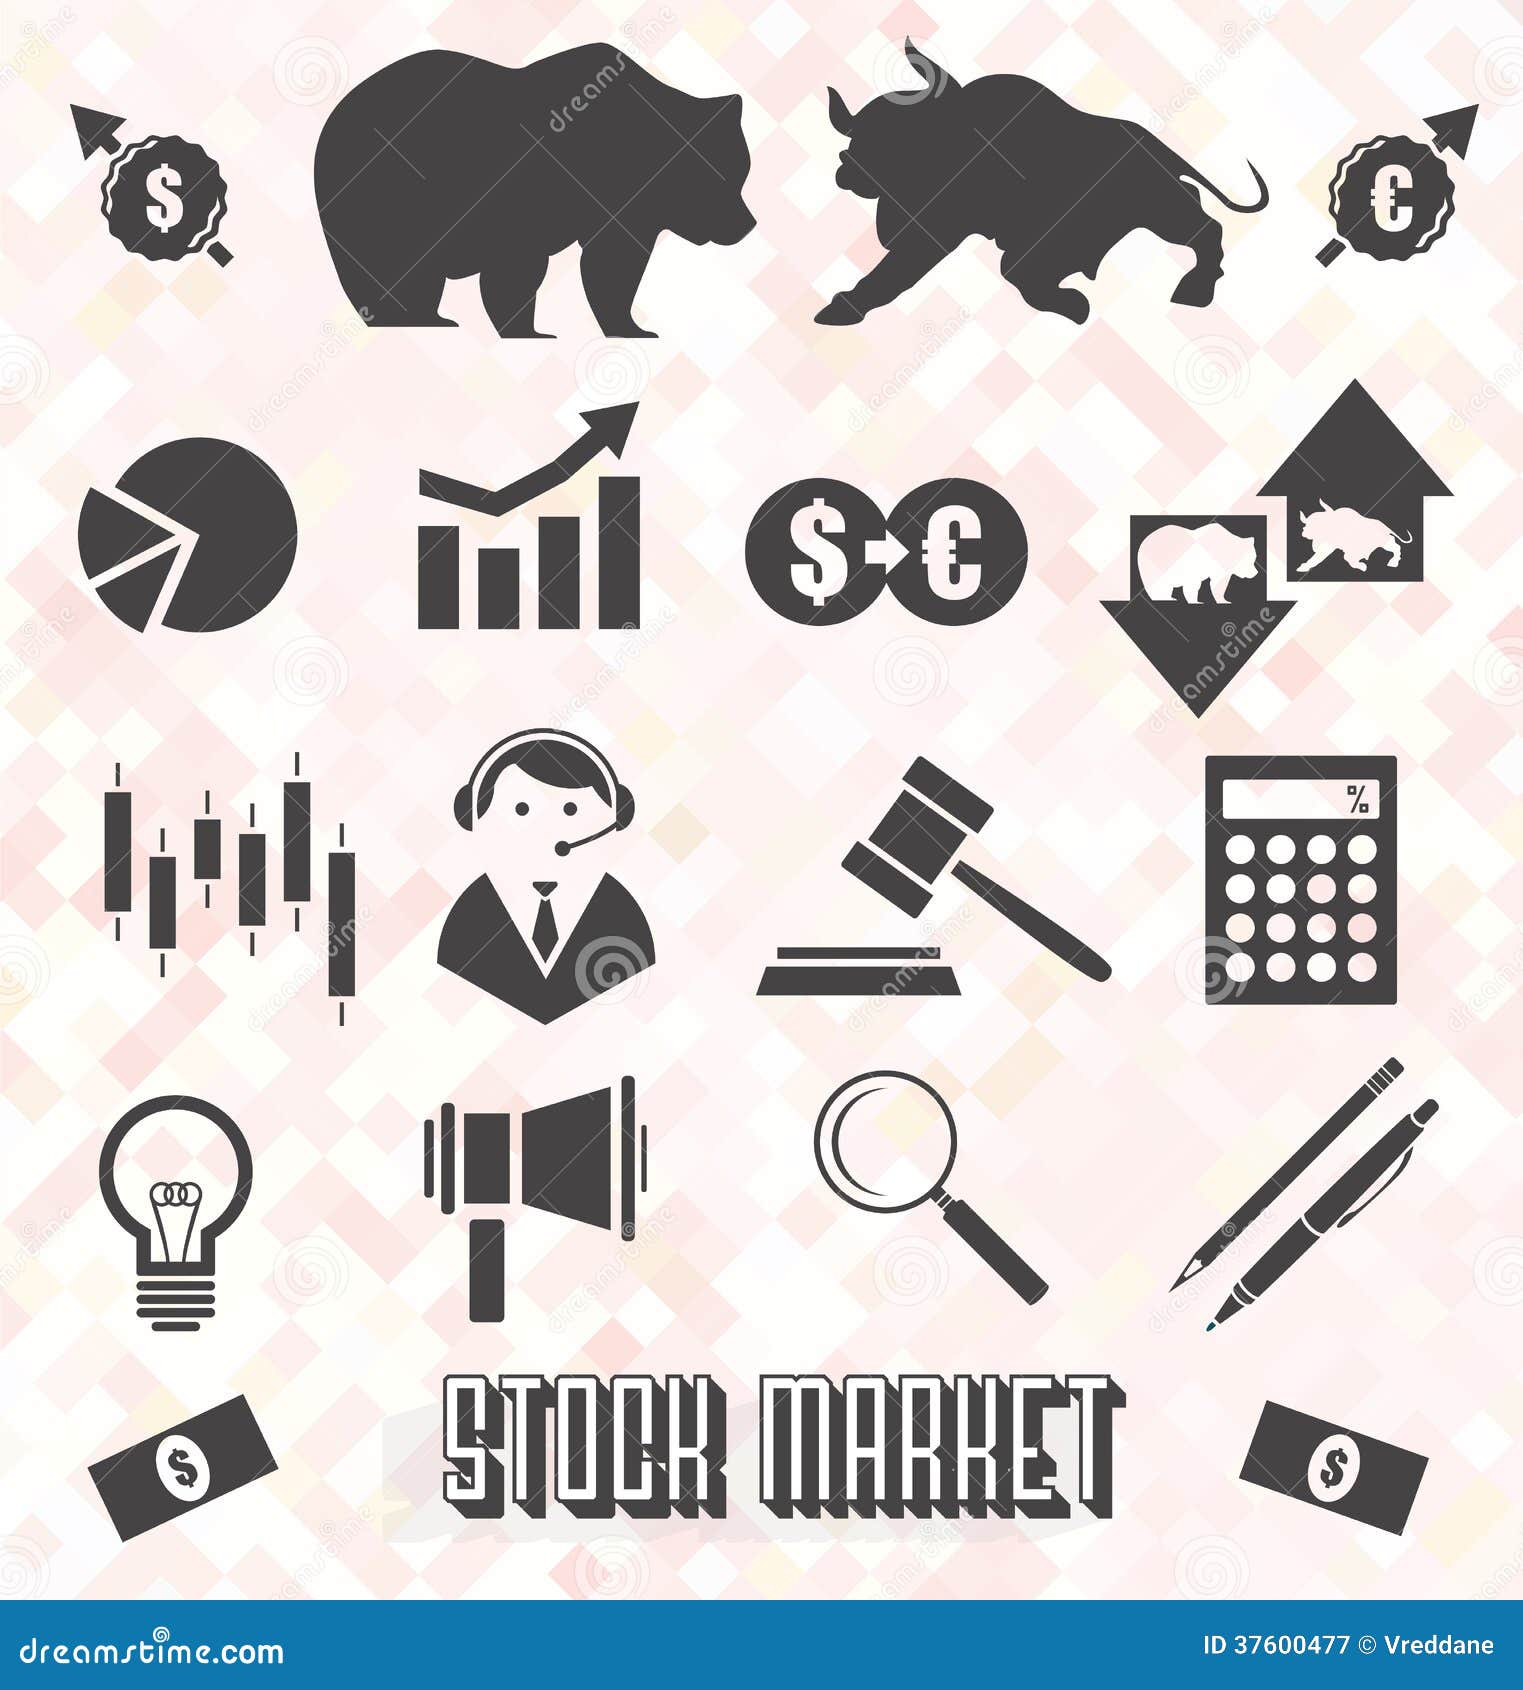 royalty free icons and clipart stock images - photo #33